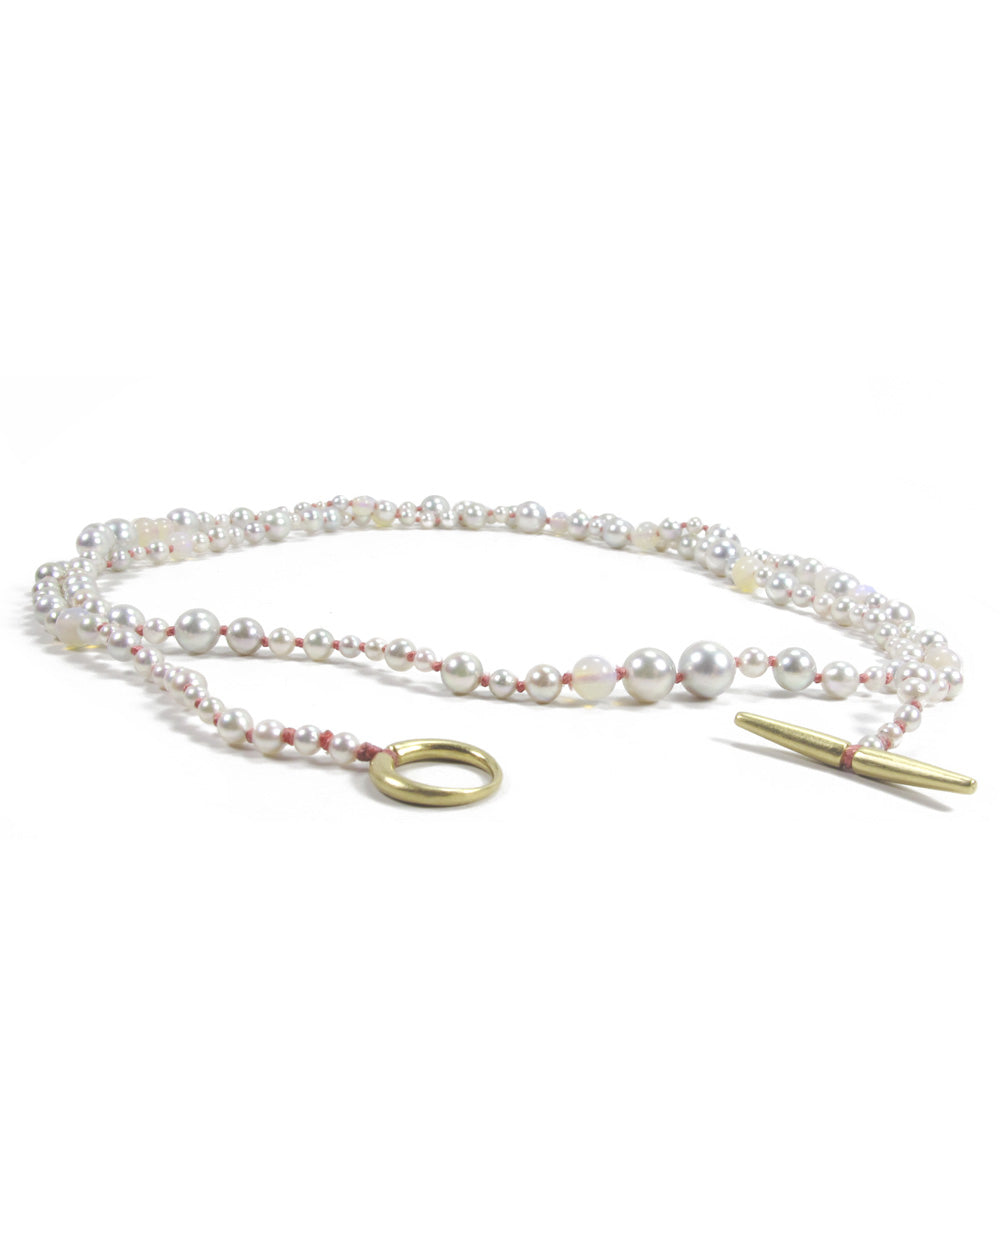 14k Pearl and Opal Necklace on Coral Silk Thread